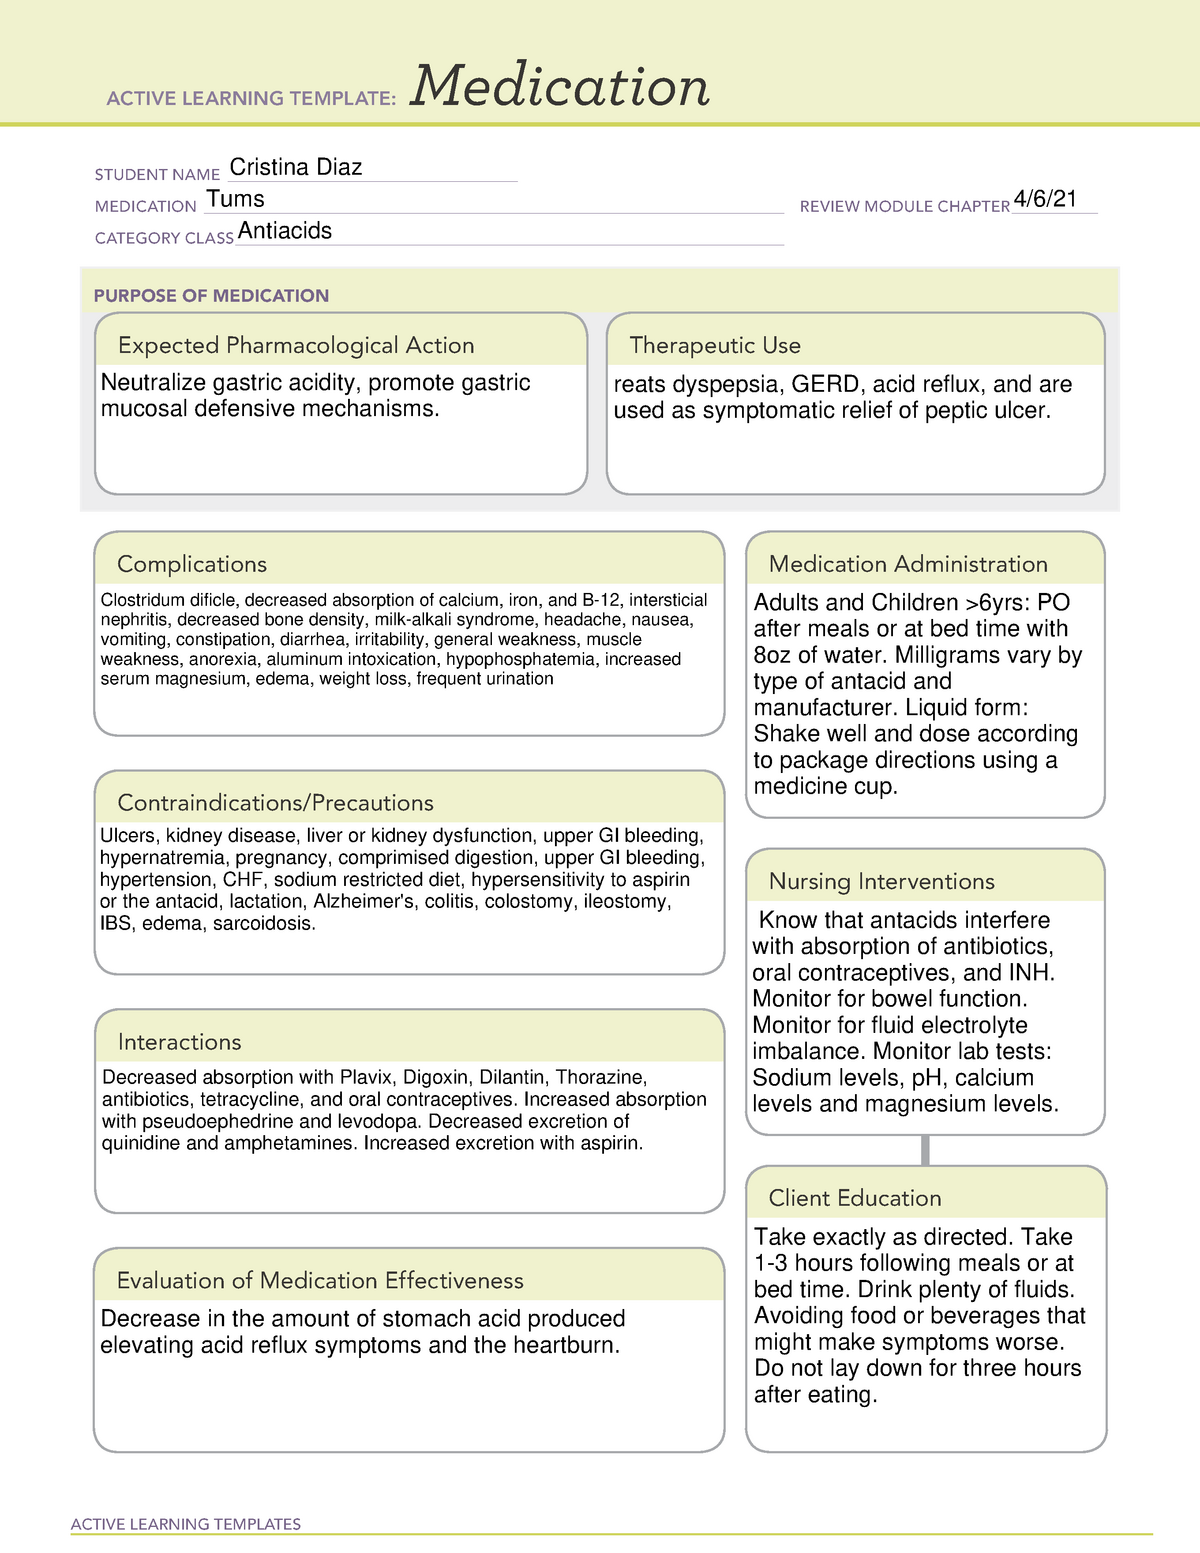 amiodarone-ati-template-active-learning-templates-therapeutic-procedure-a-medication-student